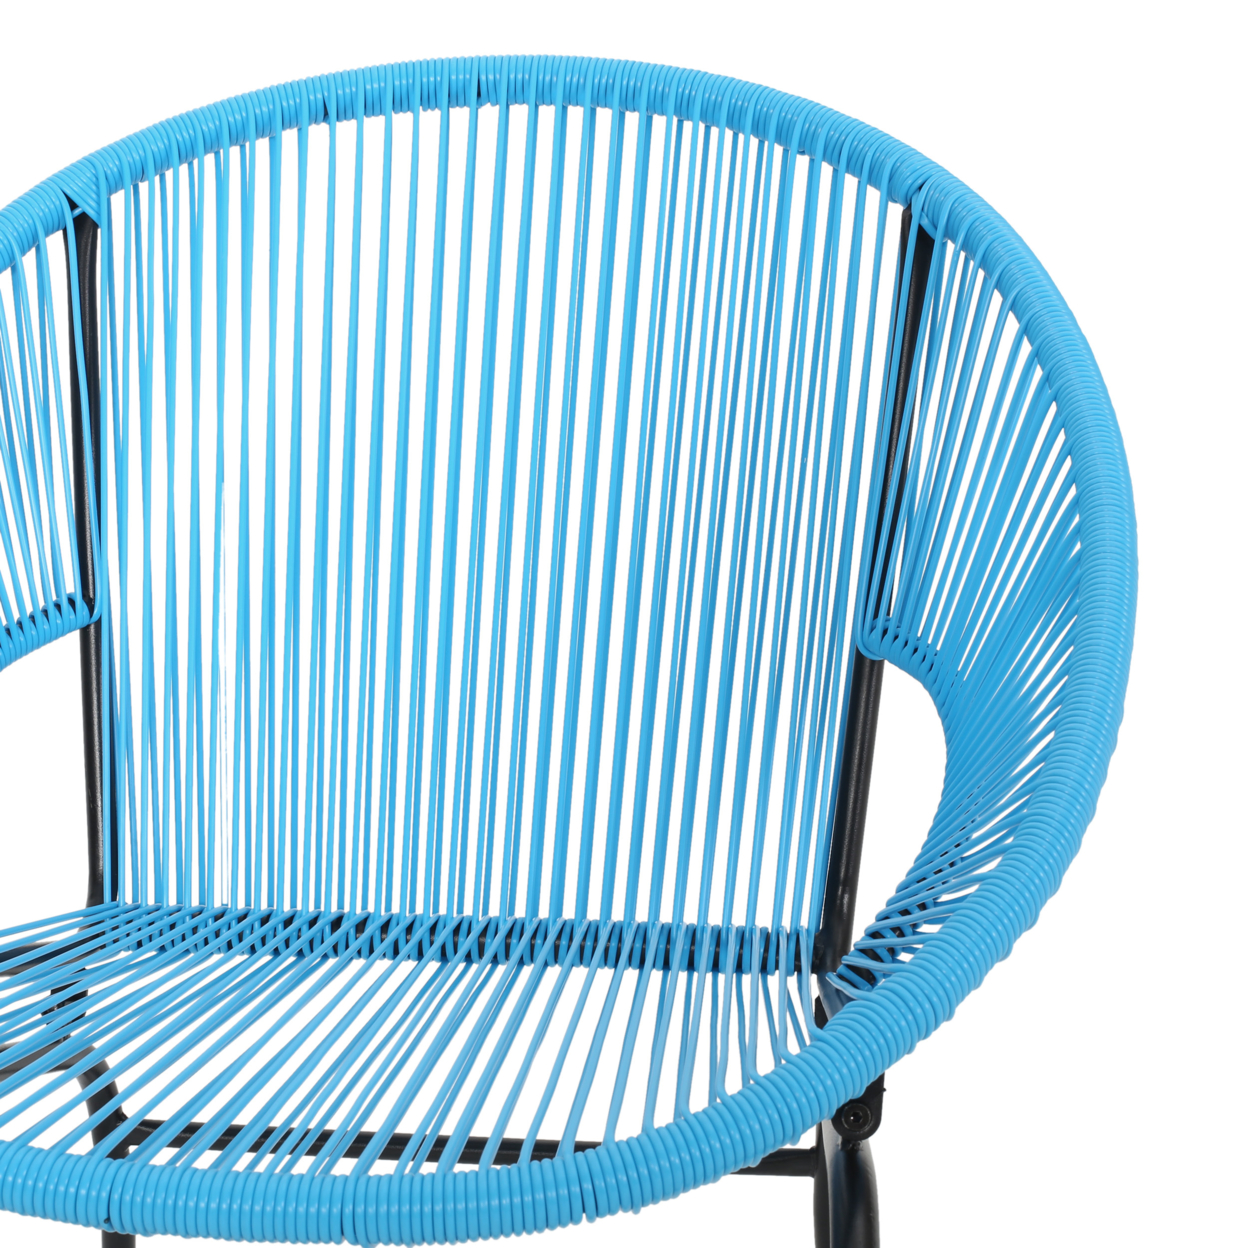 Jenny Outdoor Modern 2 Seater Faux Rattan Chat Set - Blue + Black